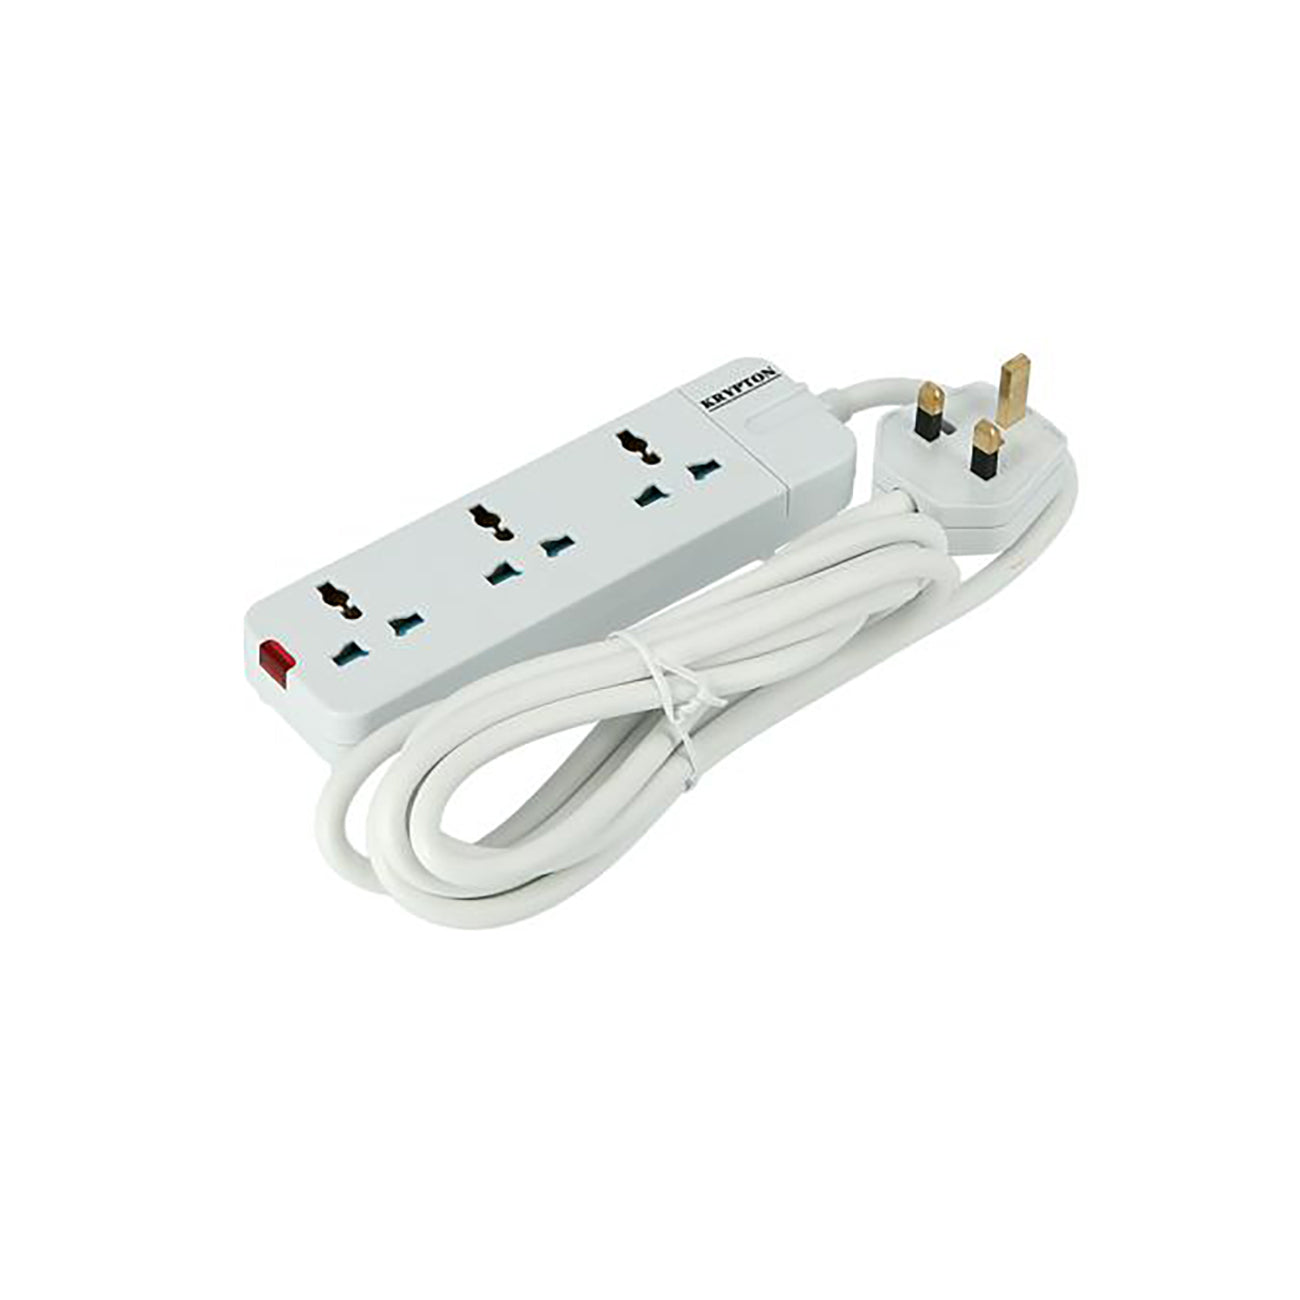 3 Way Extension Board Plug - Power Extension Socket - Multi Plug Power Cable